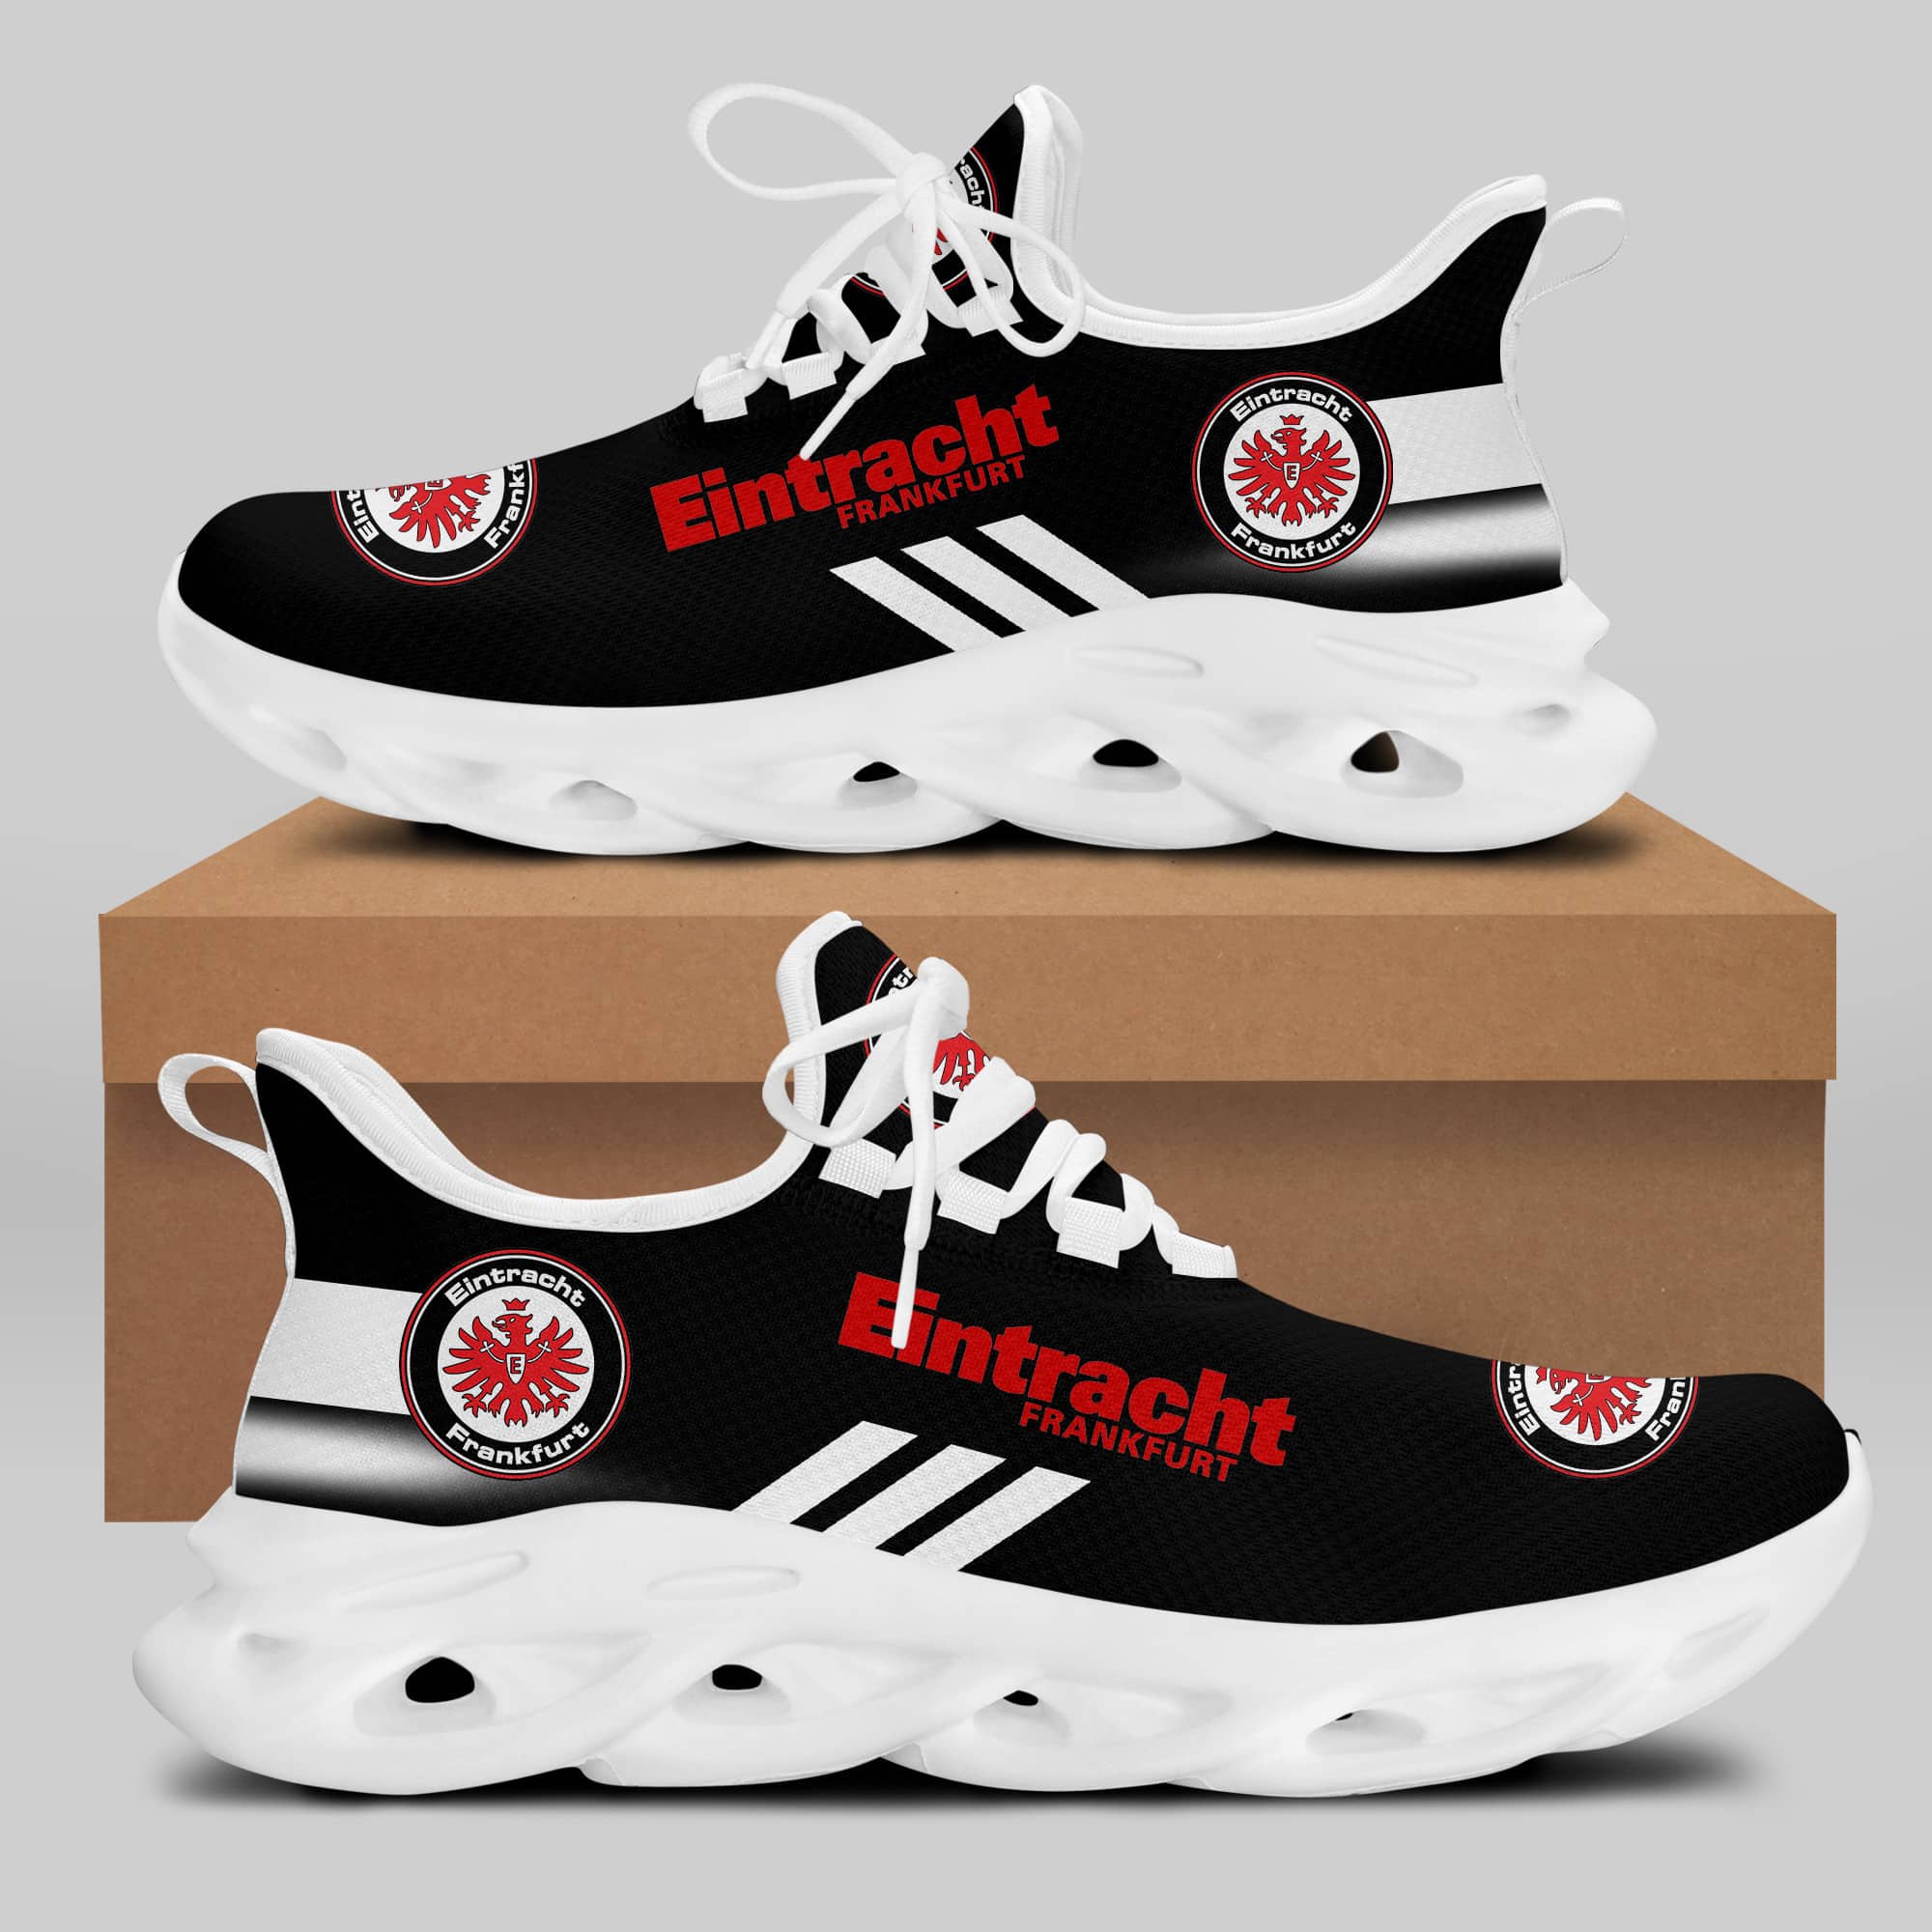 Eintracht Frankfurt Running Shoes Max Soul Shoes Sneakers Ver 10 2